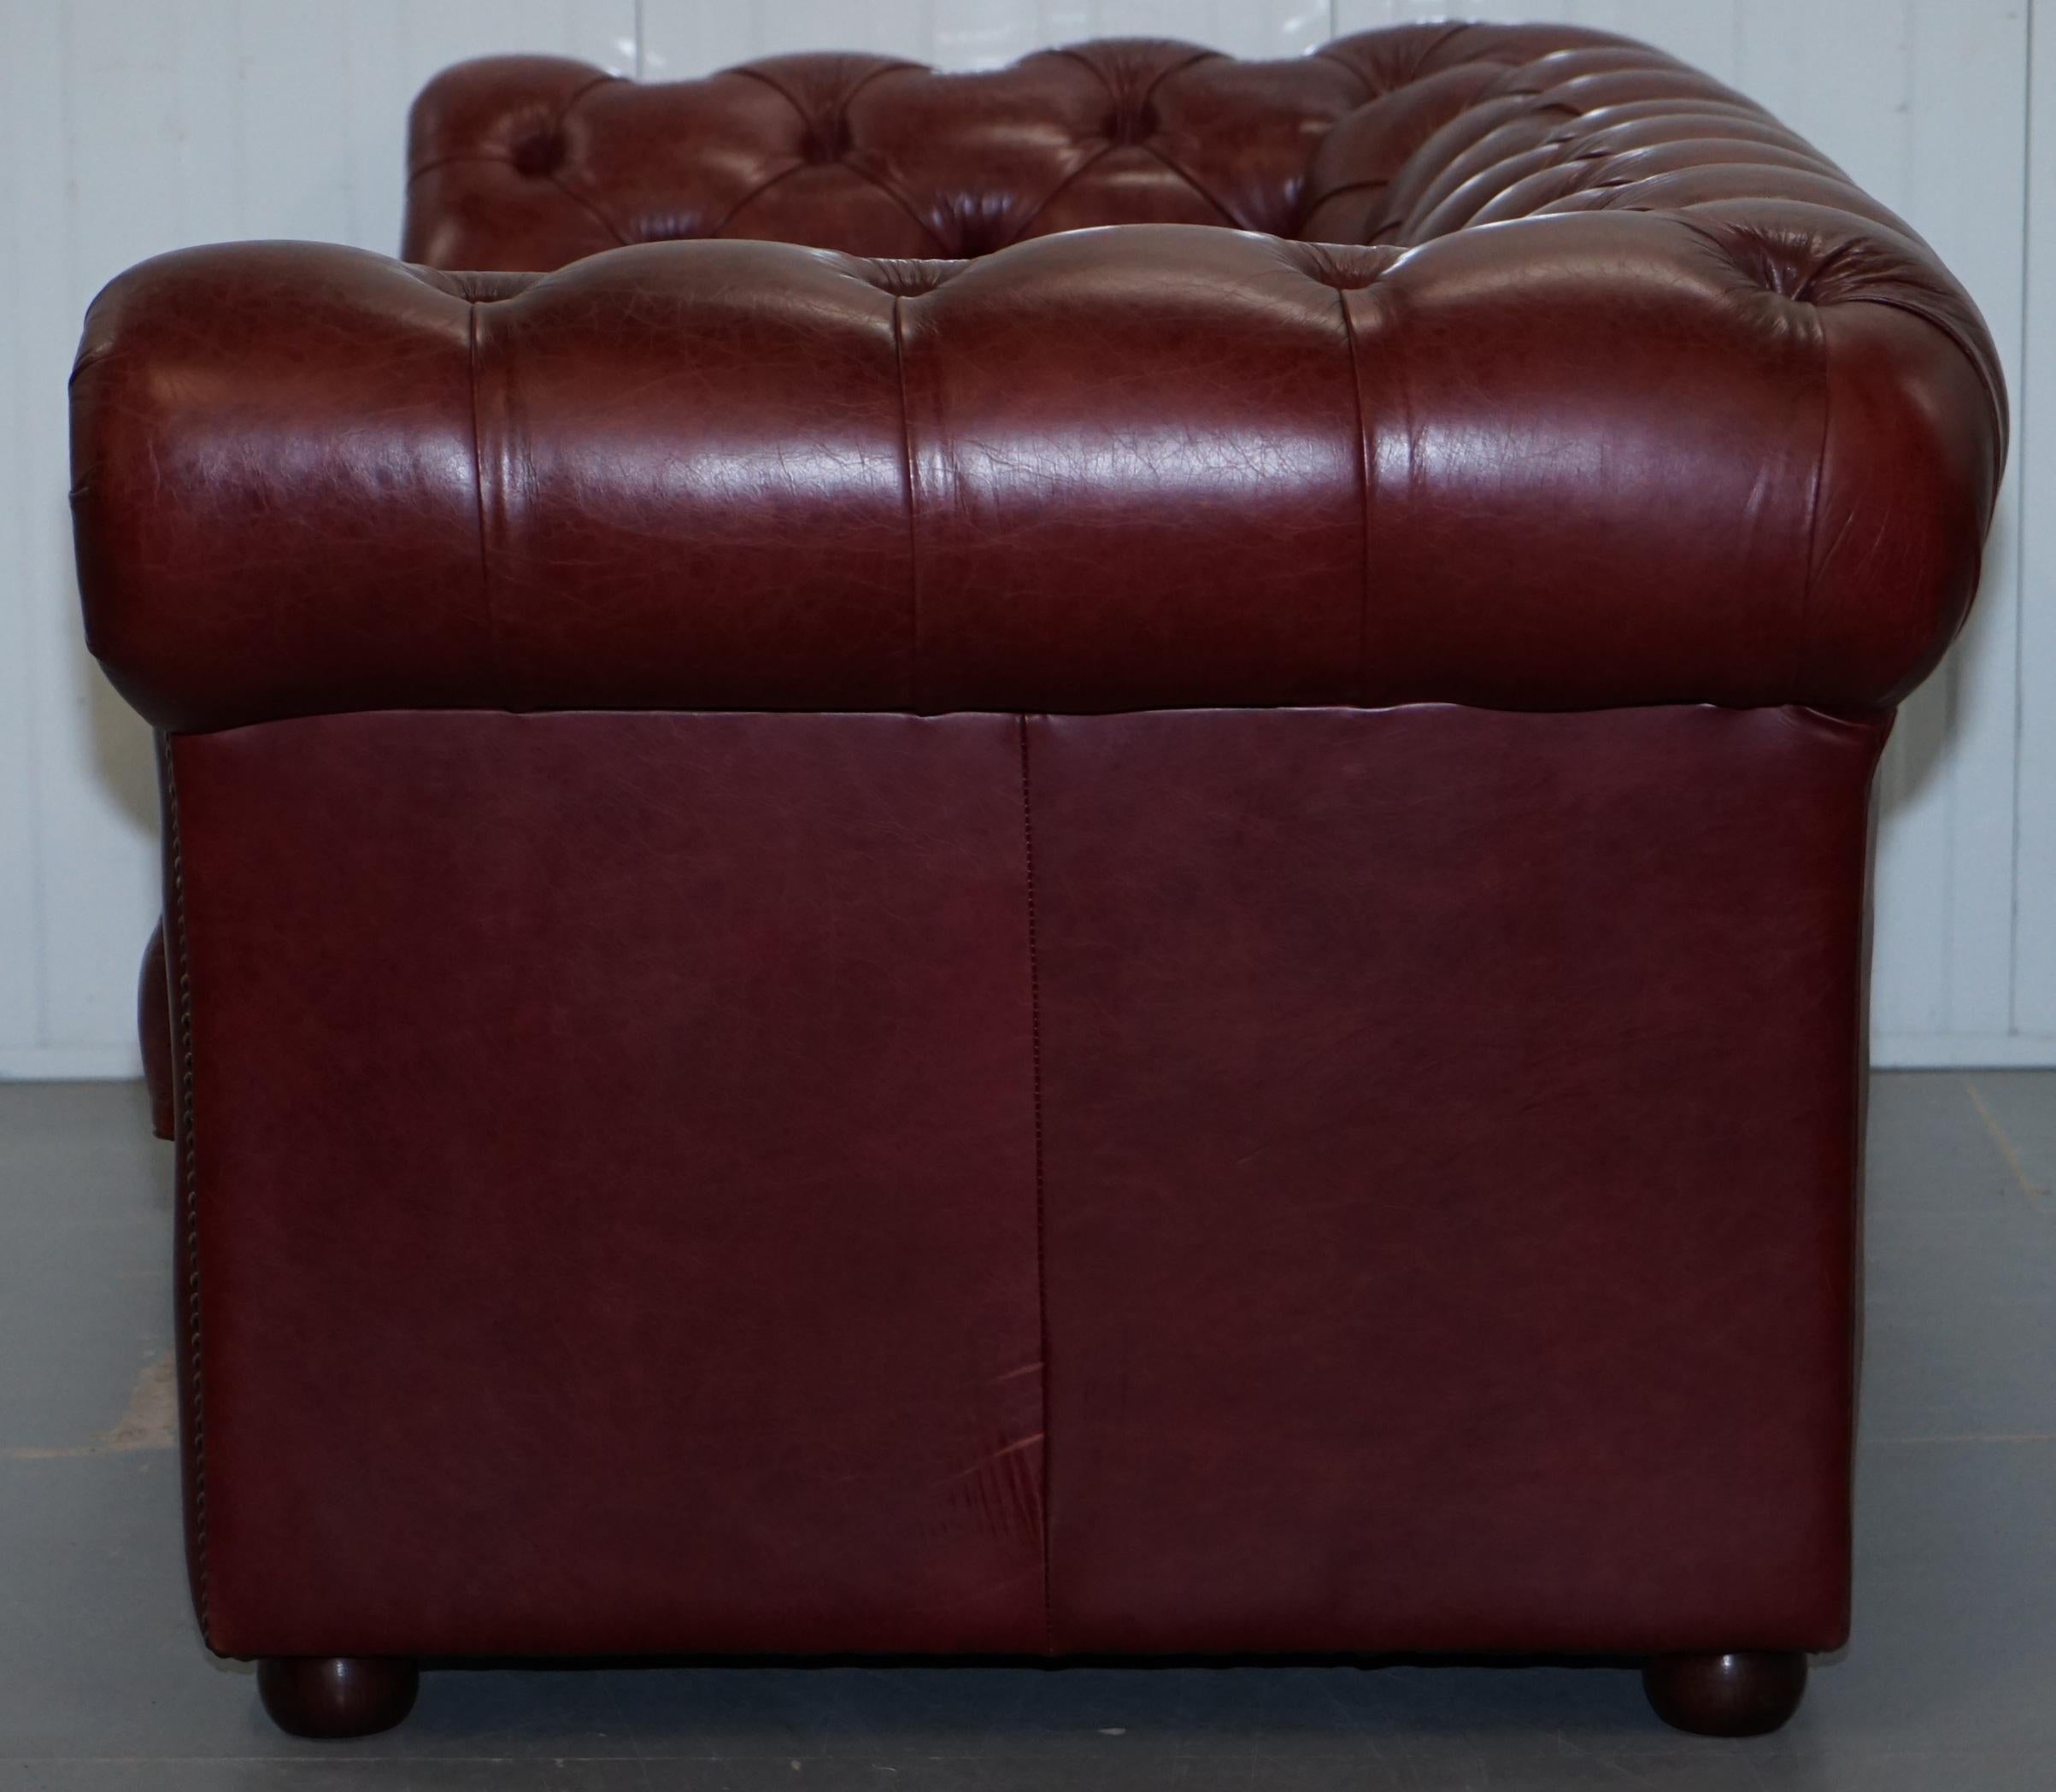  Tetrad England Reddish Brown Leather Chesterfield Sofa Part of Suite 12